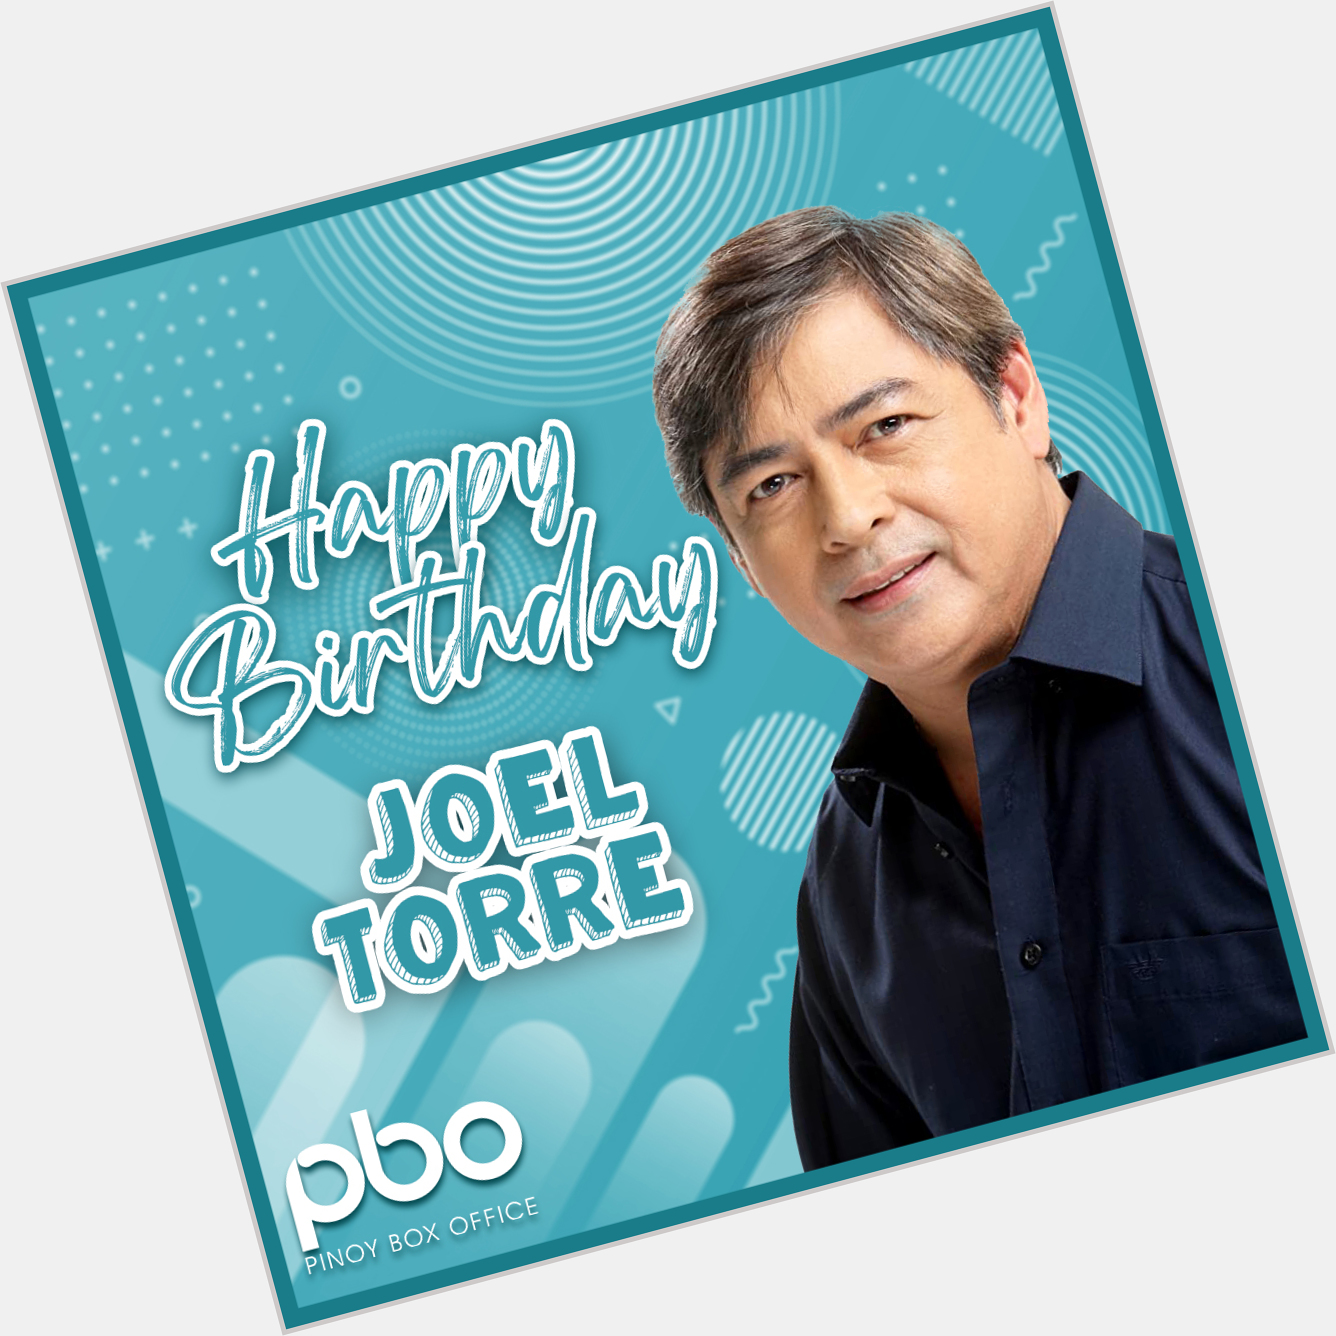 Happy birthday, Joel Torre! Wishing you a day filled with happiness and plenty of love! 